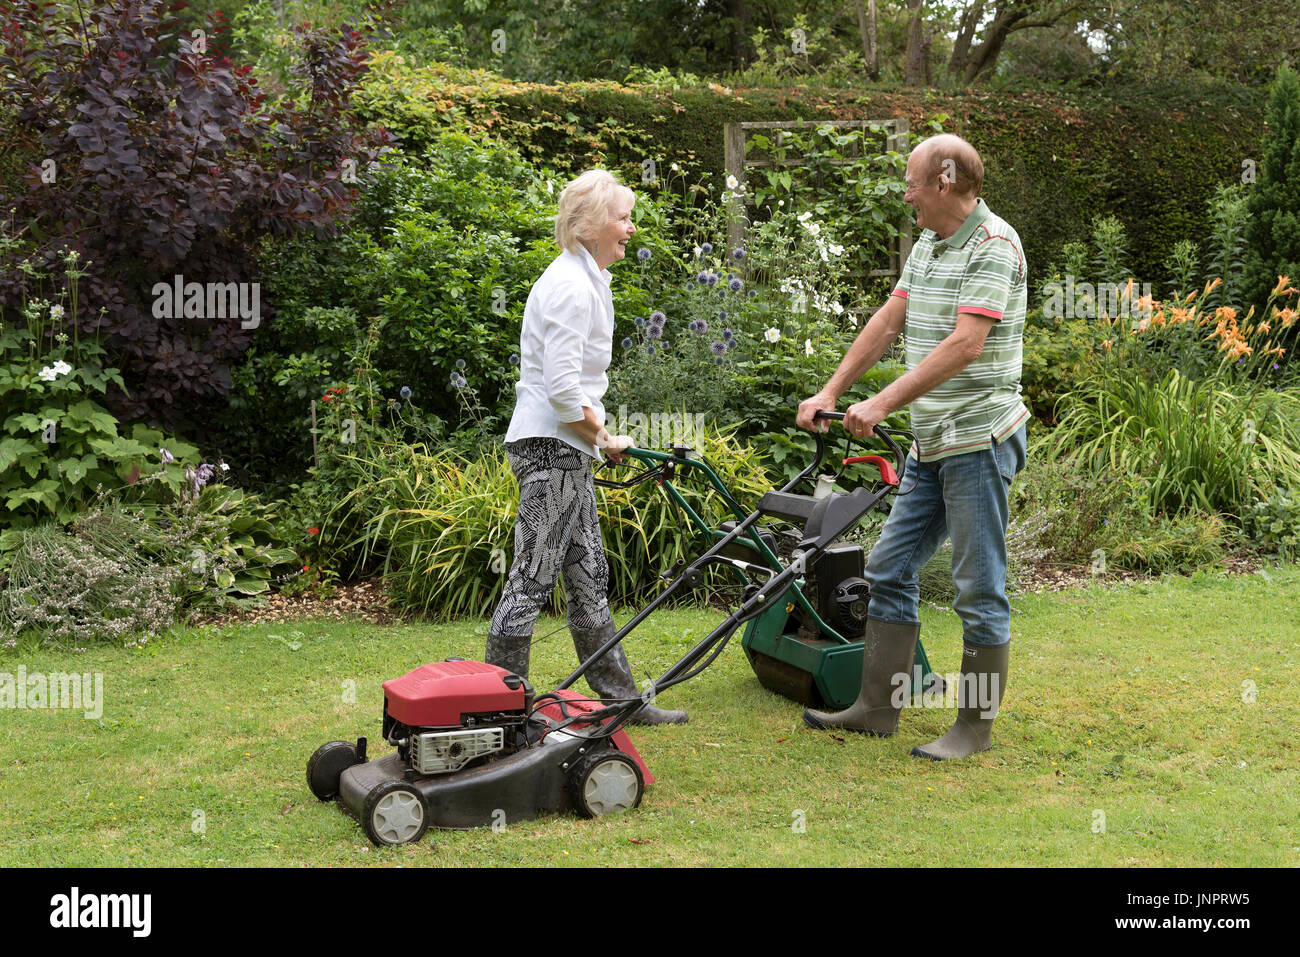 Man and woman with lawn mowers working in a country garden Stock Photo